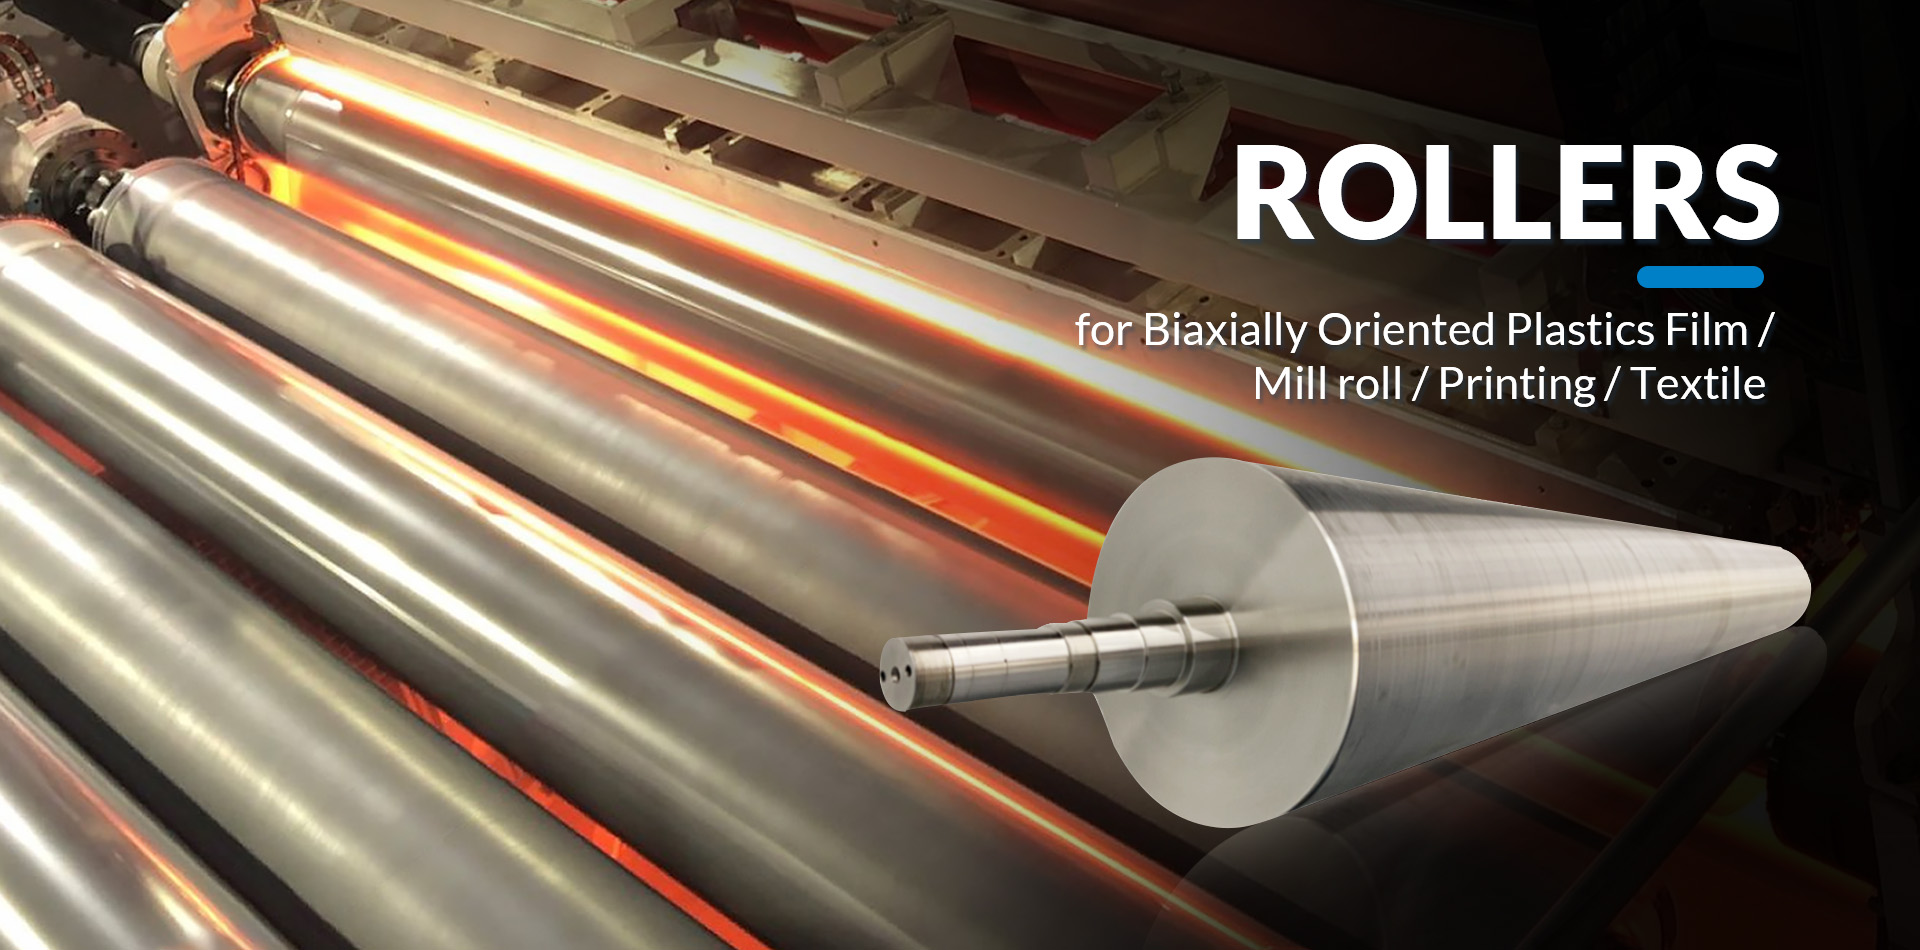 Rollers for Plastic Films